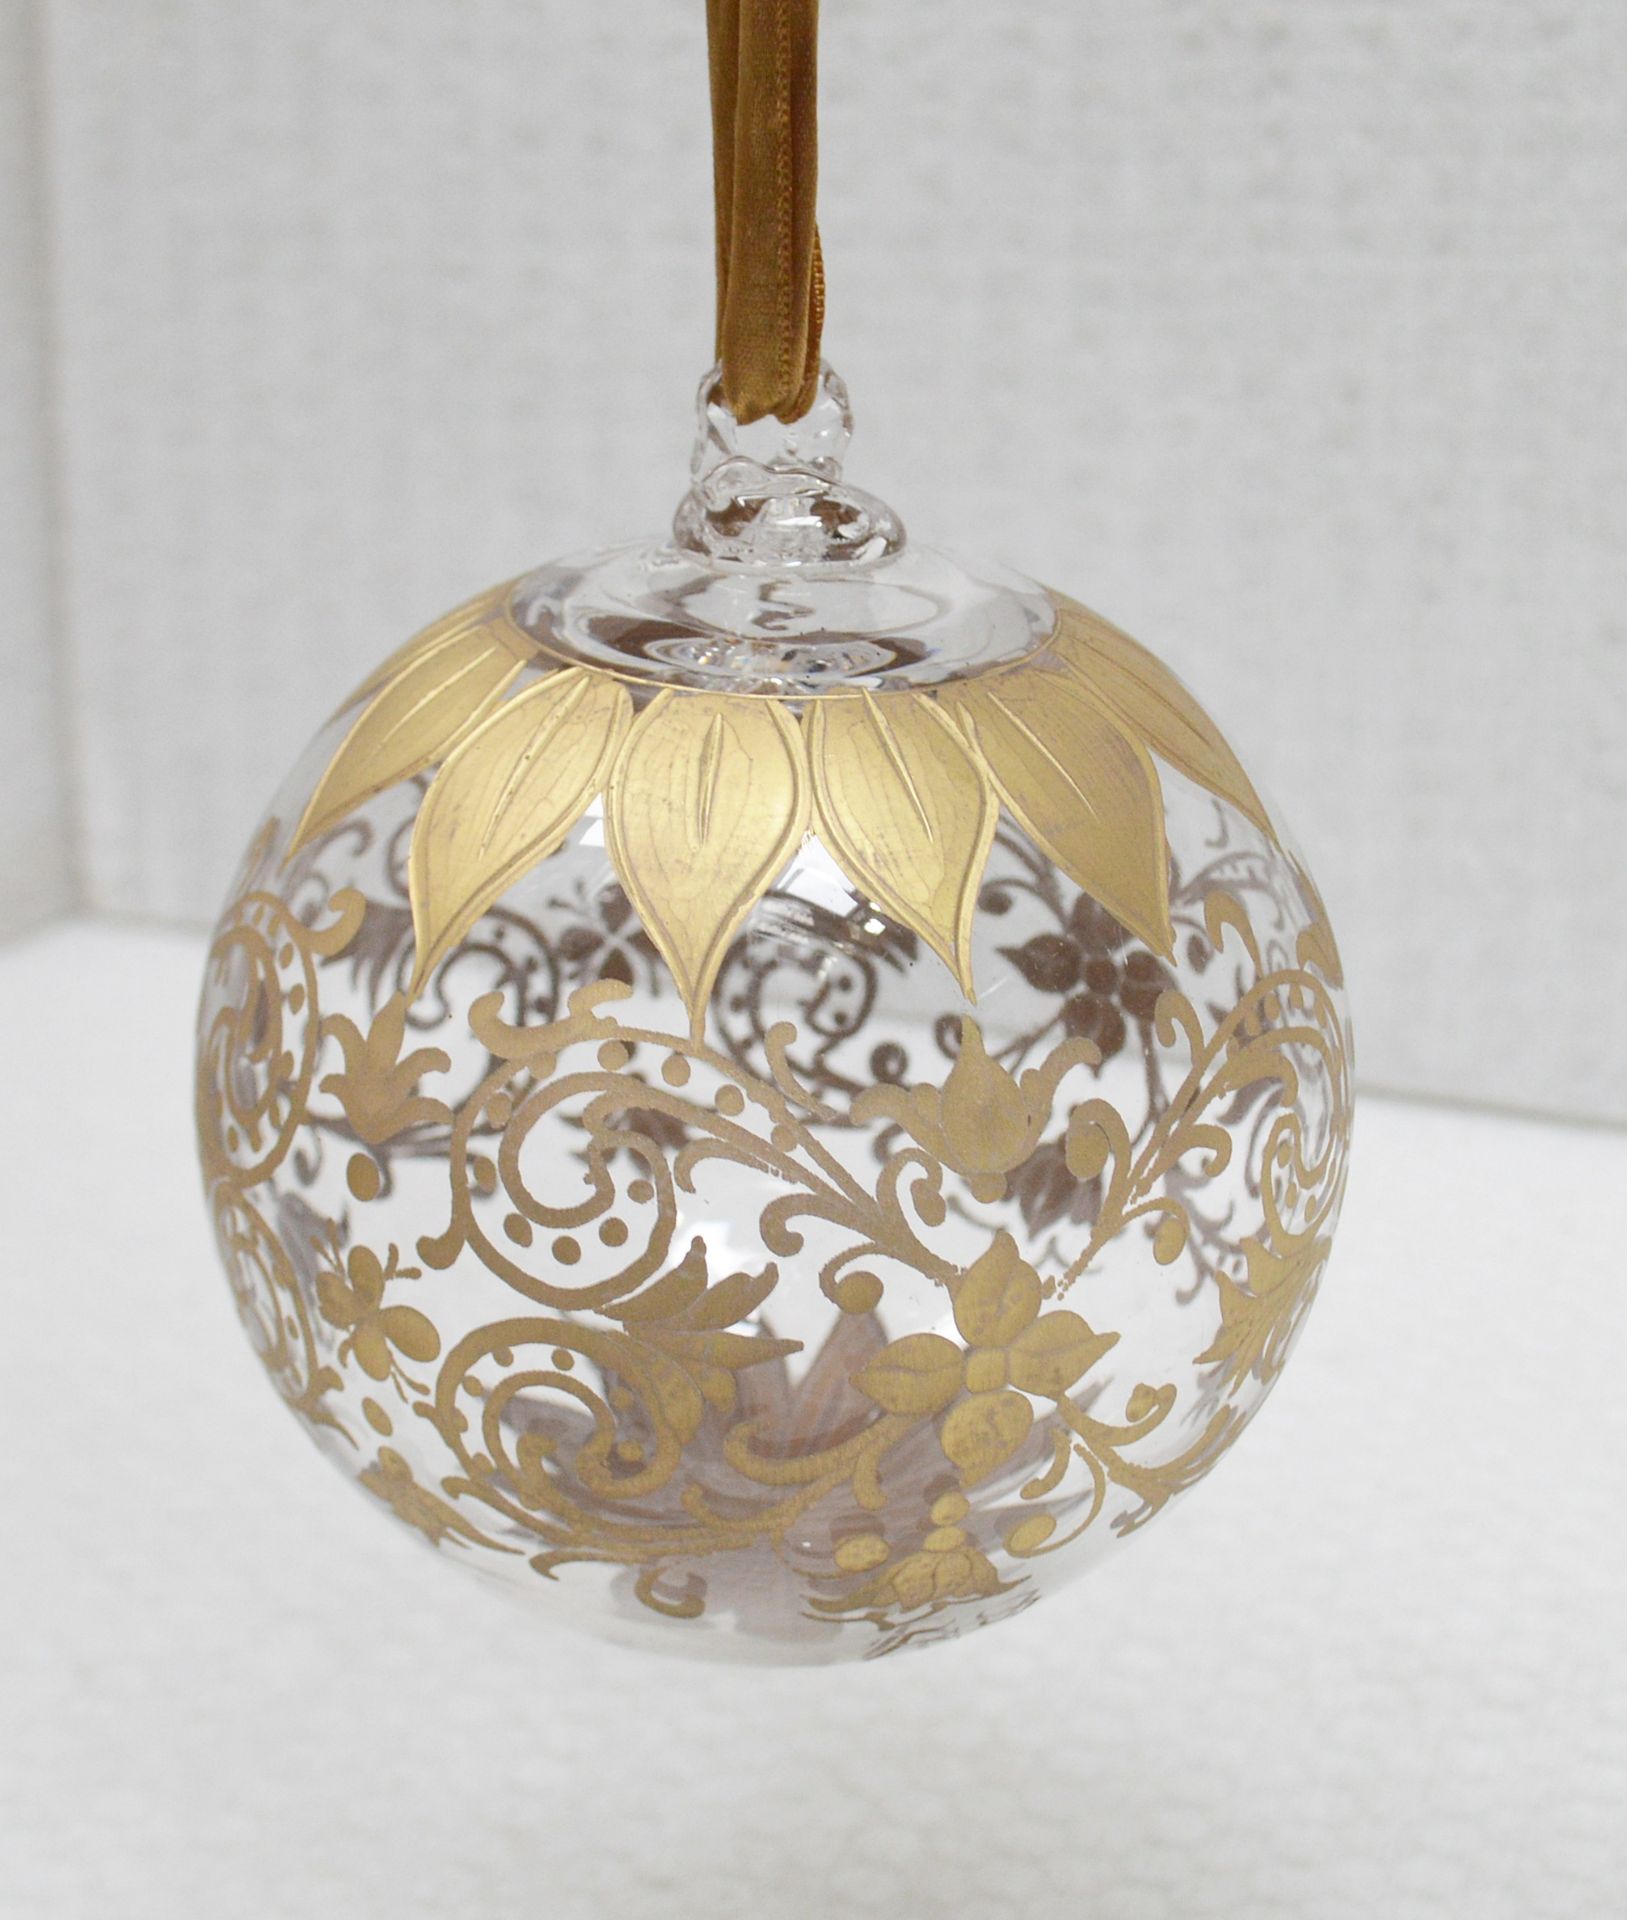 1 x BALDI 'Home Jewels' Italian Hand-crafted Artisan Christmas Tree Decoration In Gold - Dimensions: - Image 3 of 4